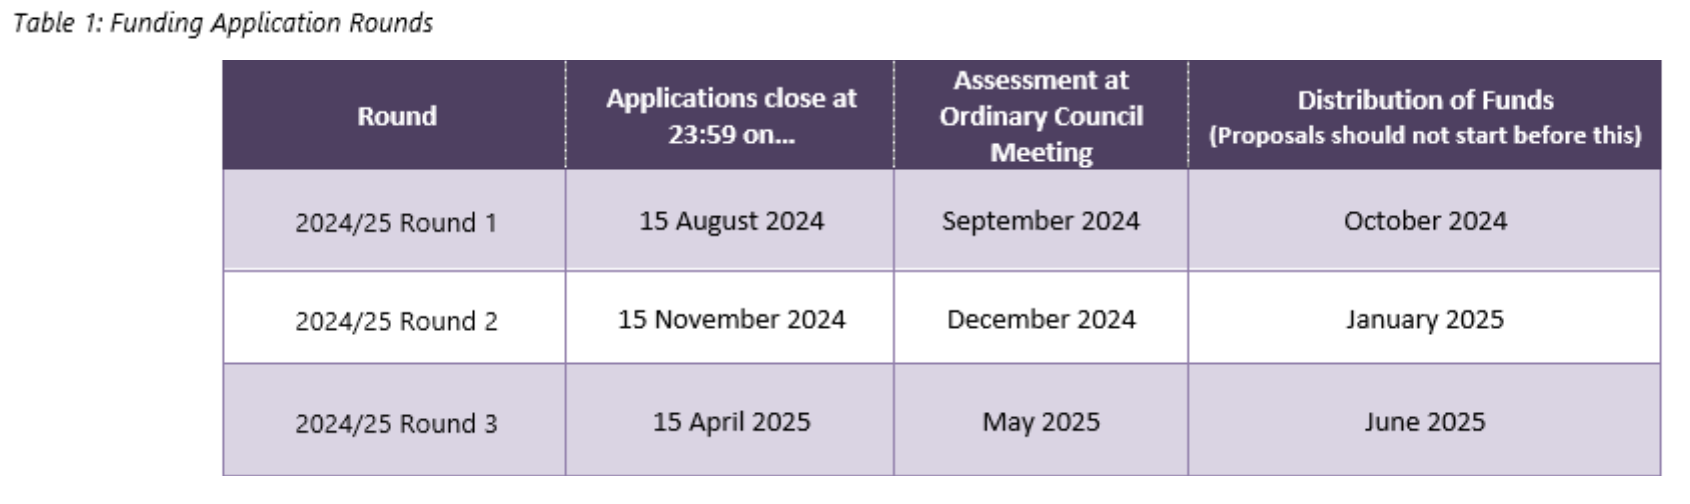 Funding Applications Rounds - 2024 2025.png